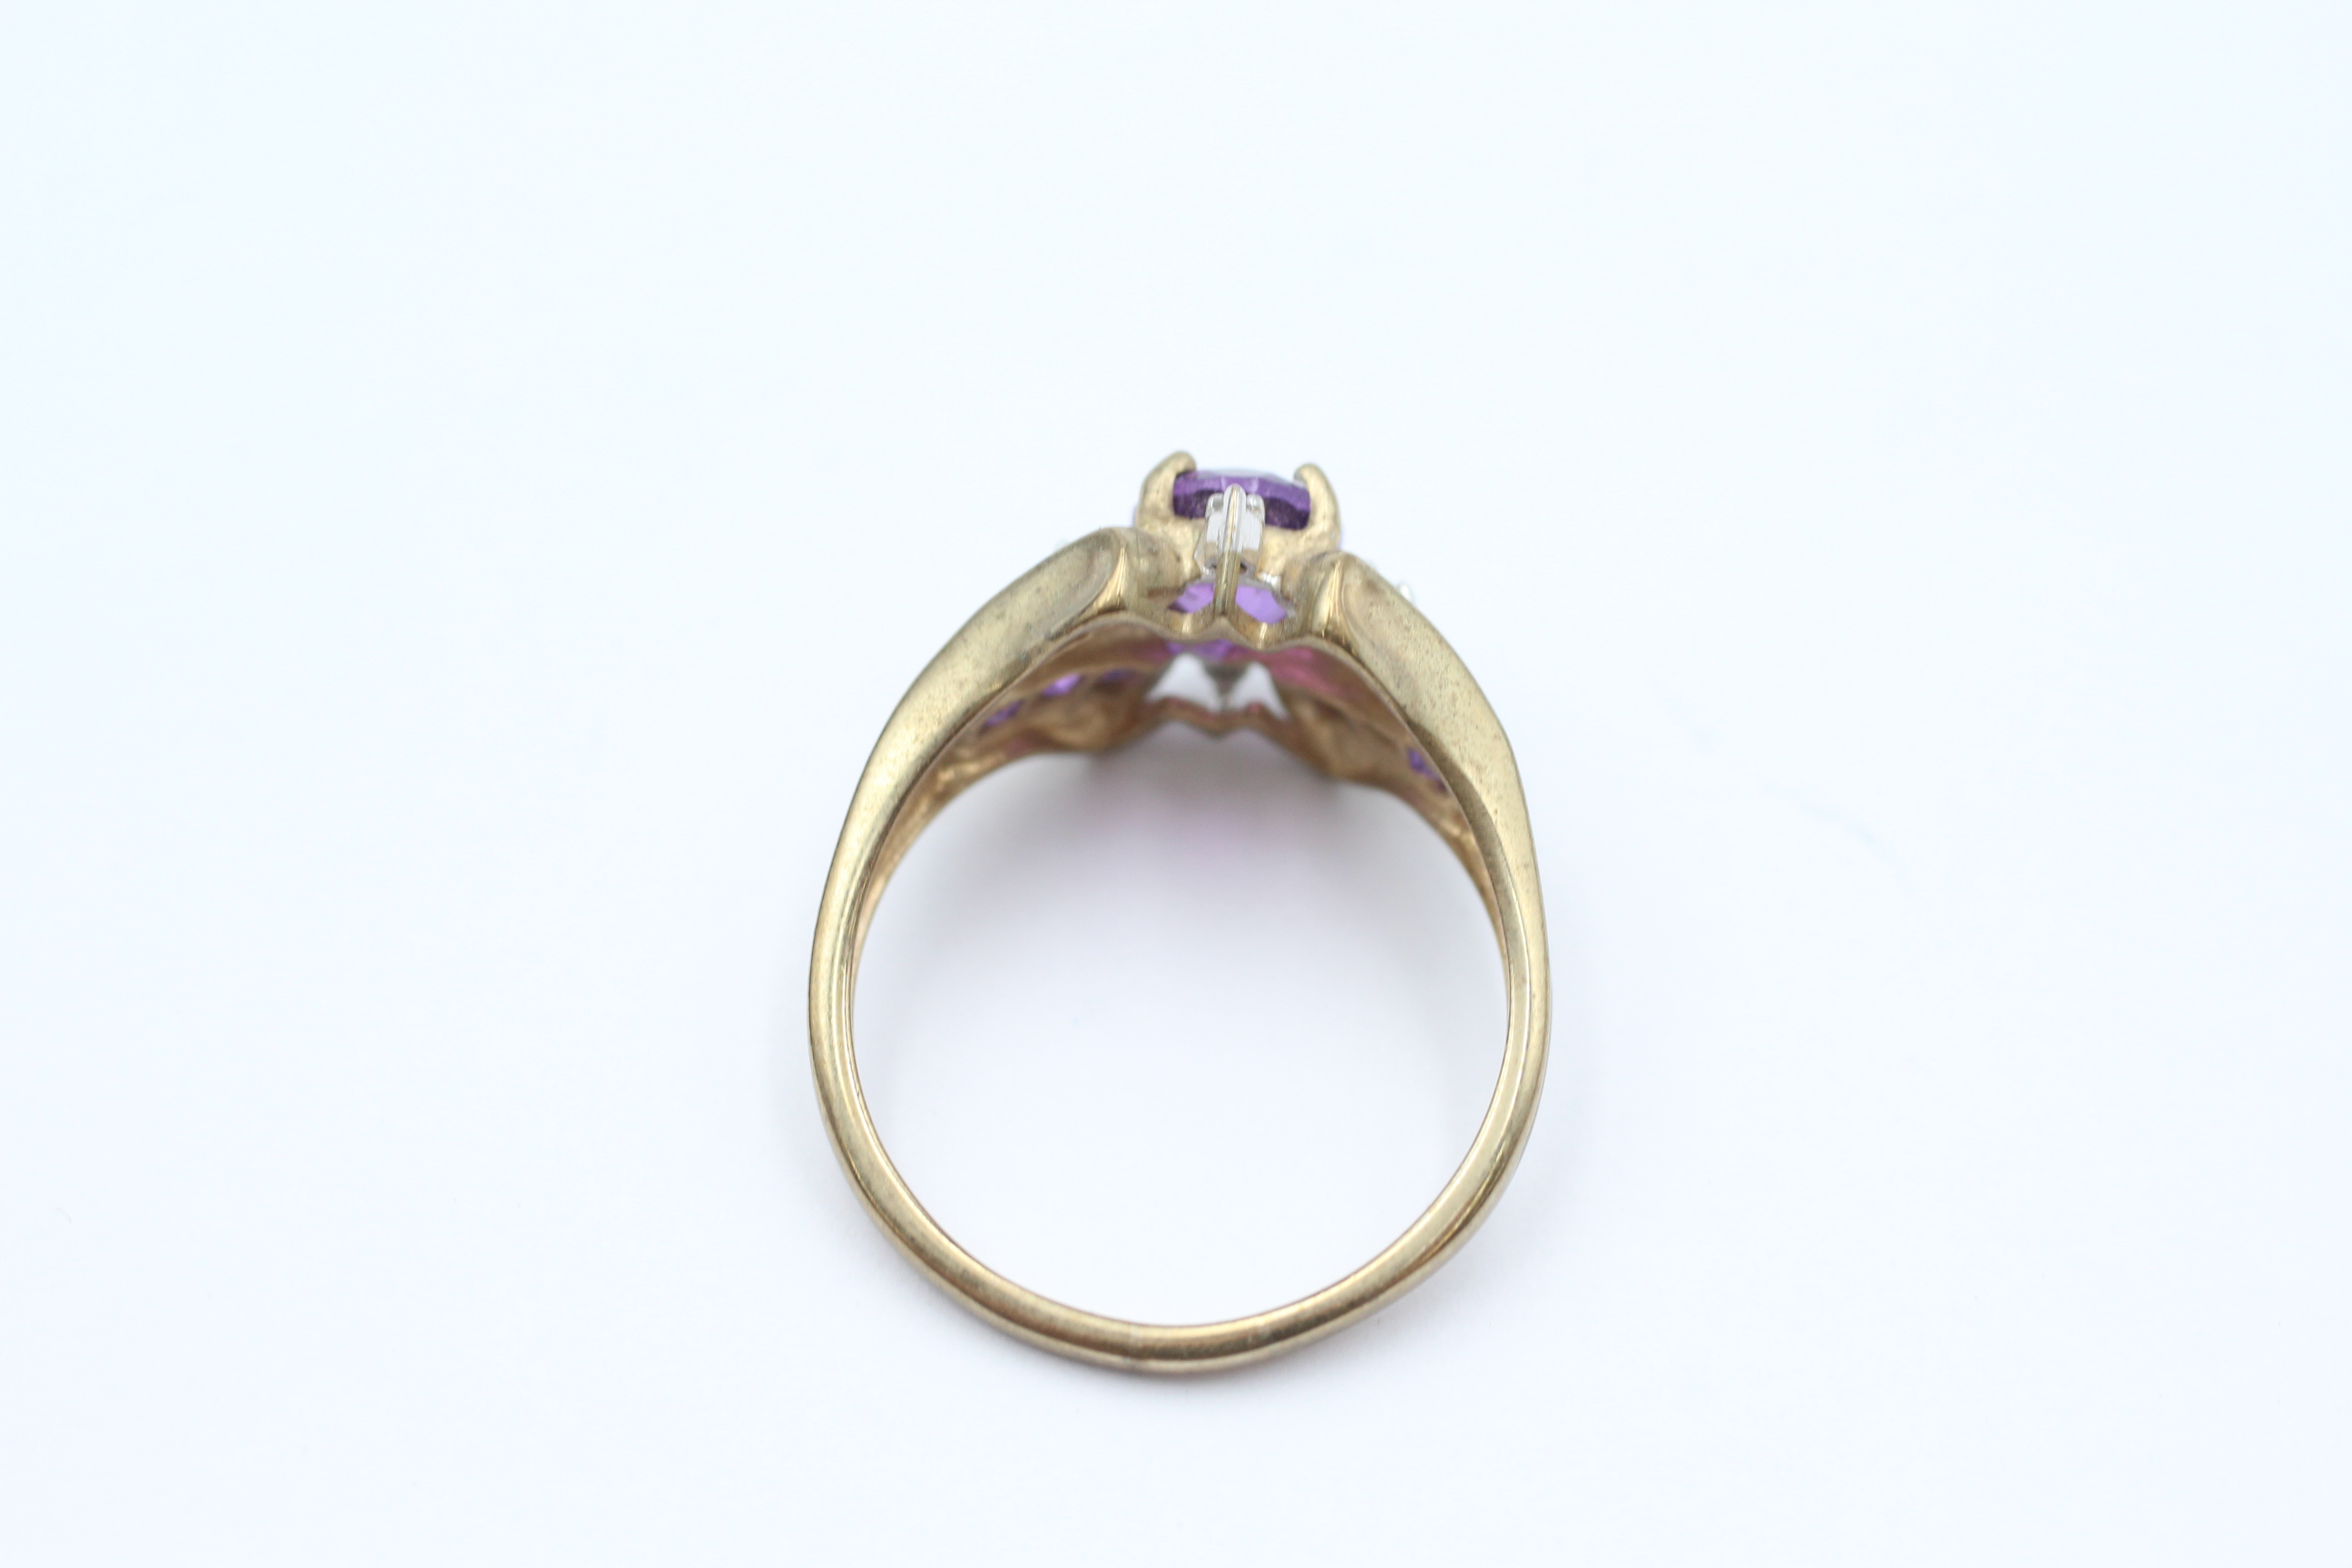 9ct gold diamond & amethyst cluster ring with tapered shank Size P 1/2 - 3.2 g - Image 4 of 4